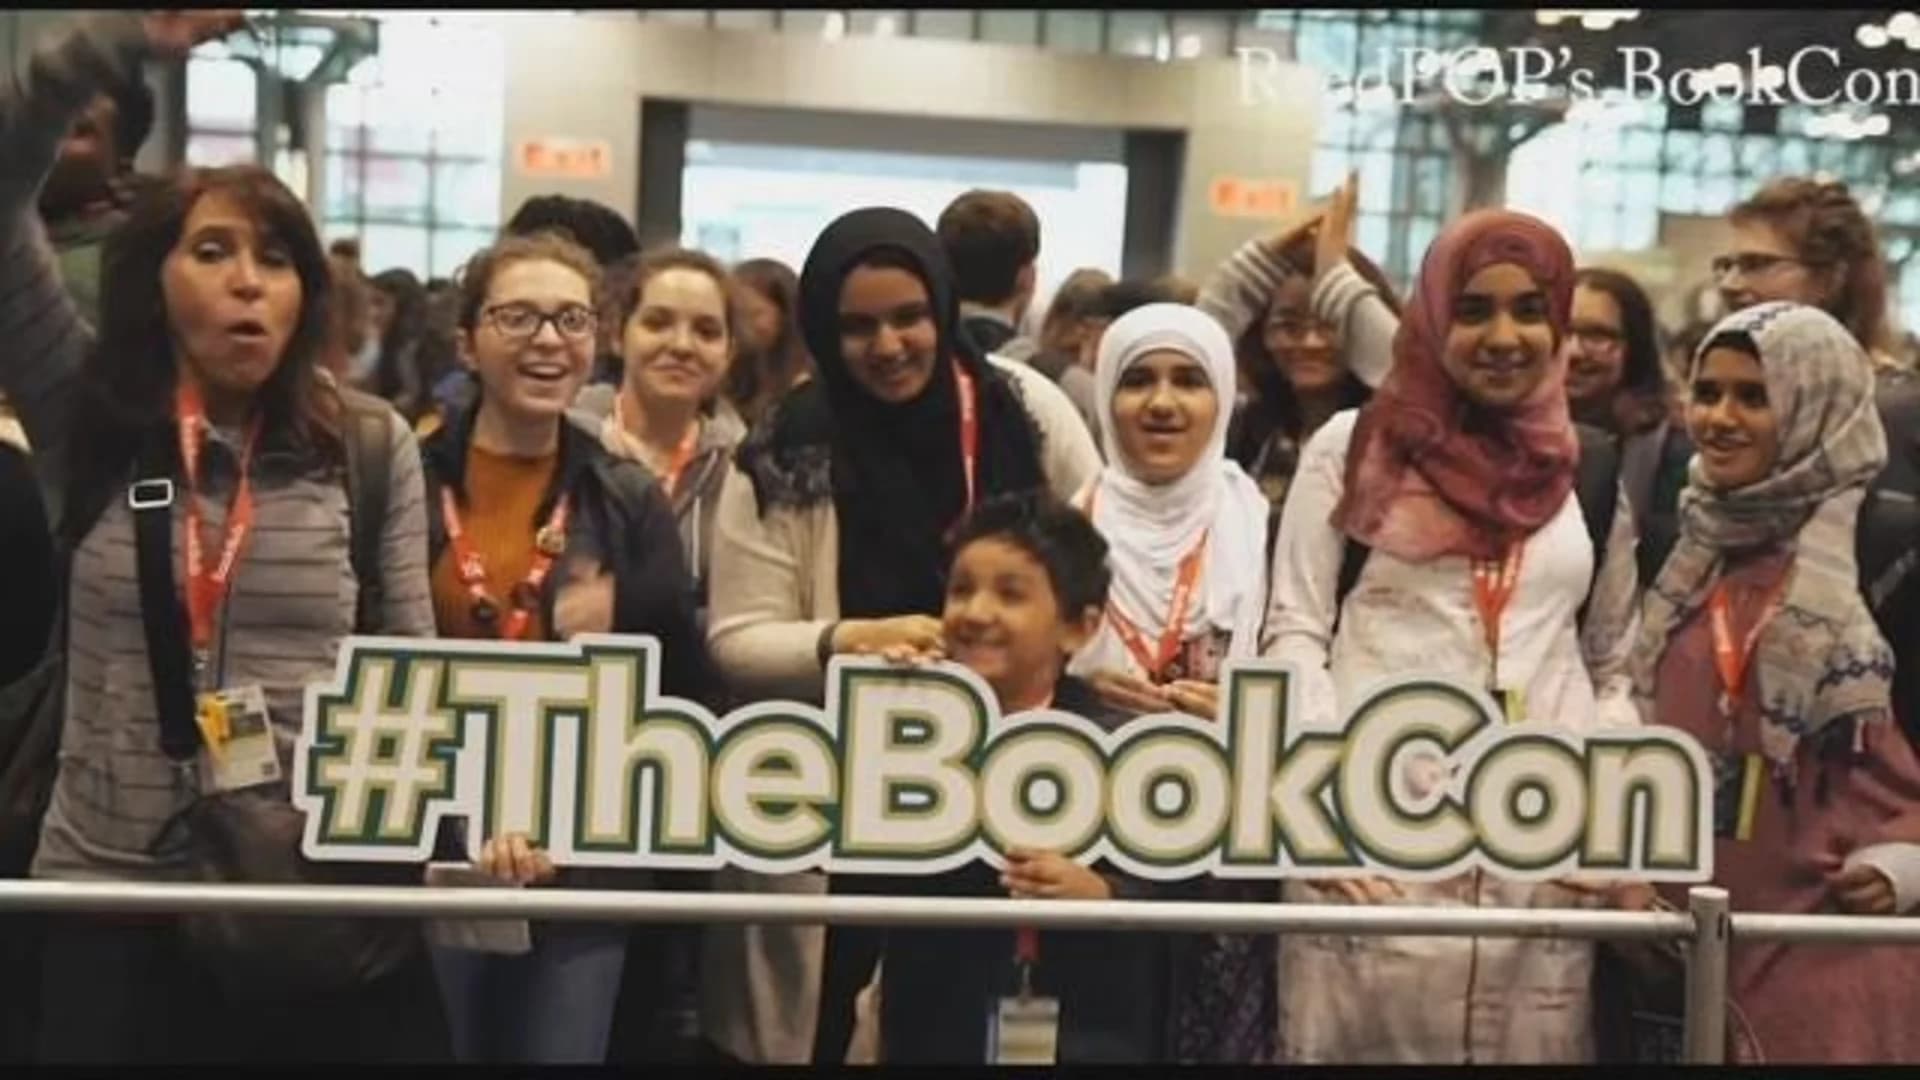 Largest book convention in US held at Javits Center